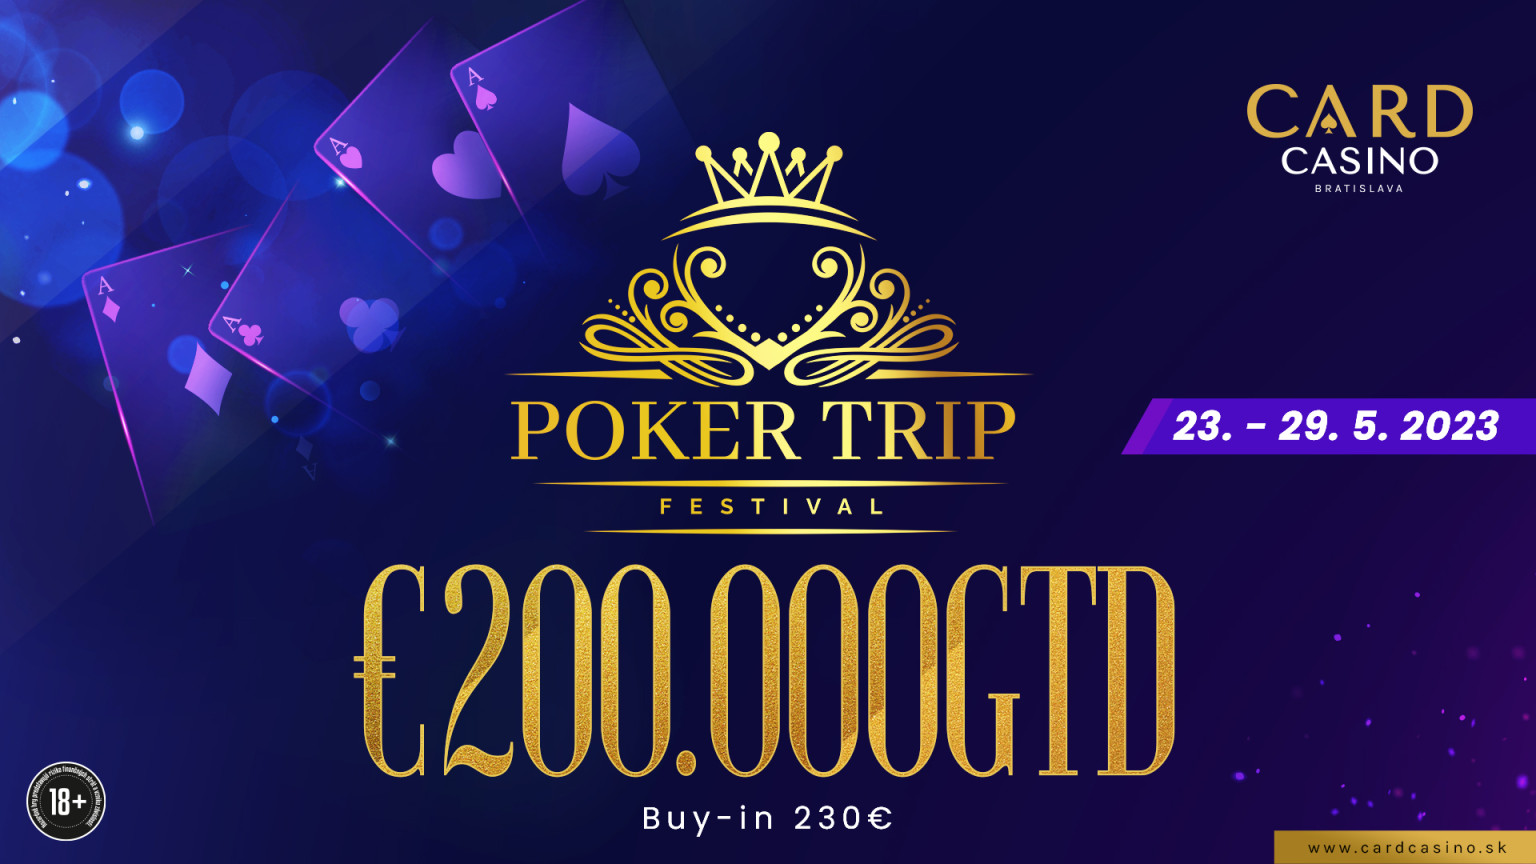 Croatia in Card Casino. The €200,000 GTD Poker Trip Festival will take place in May!